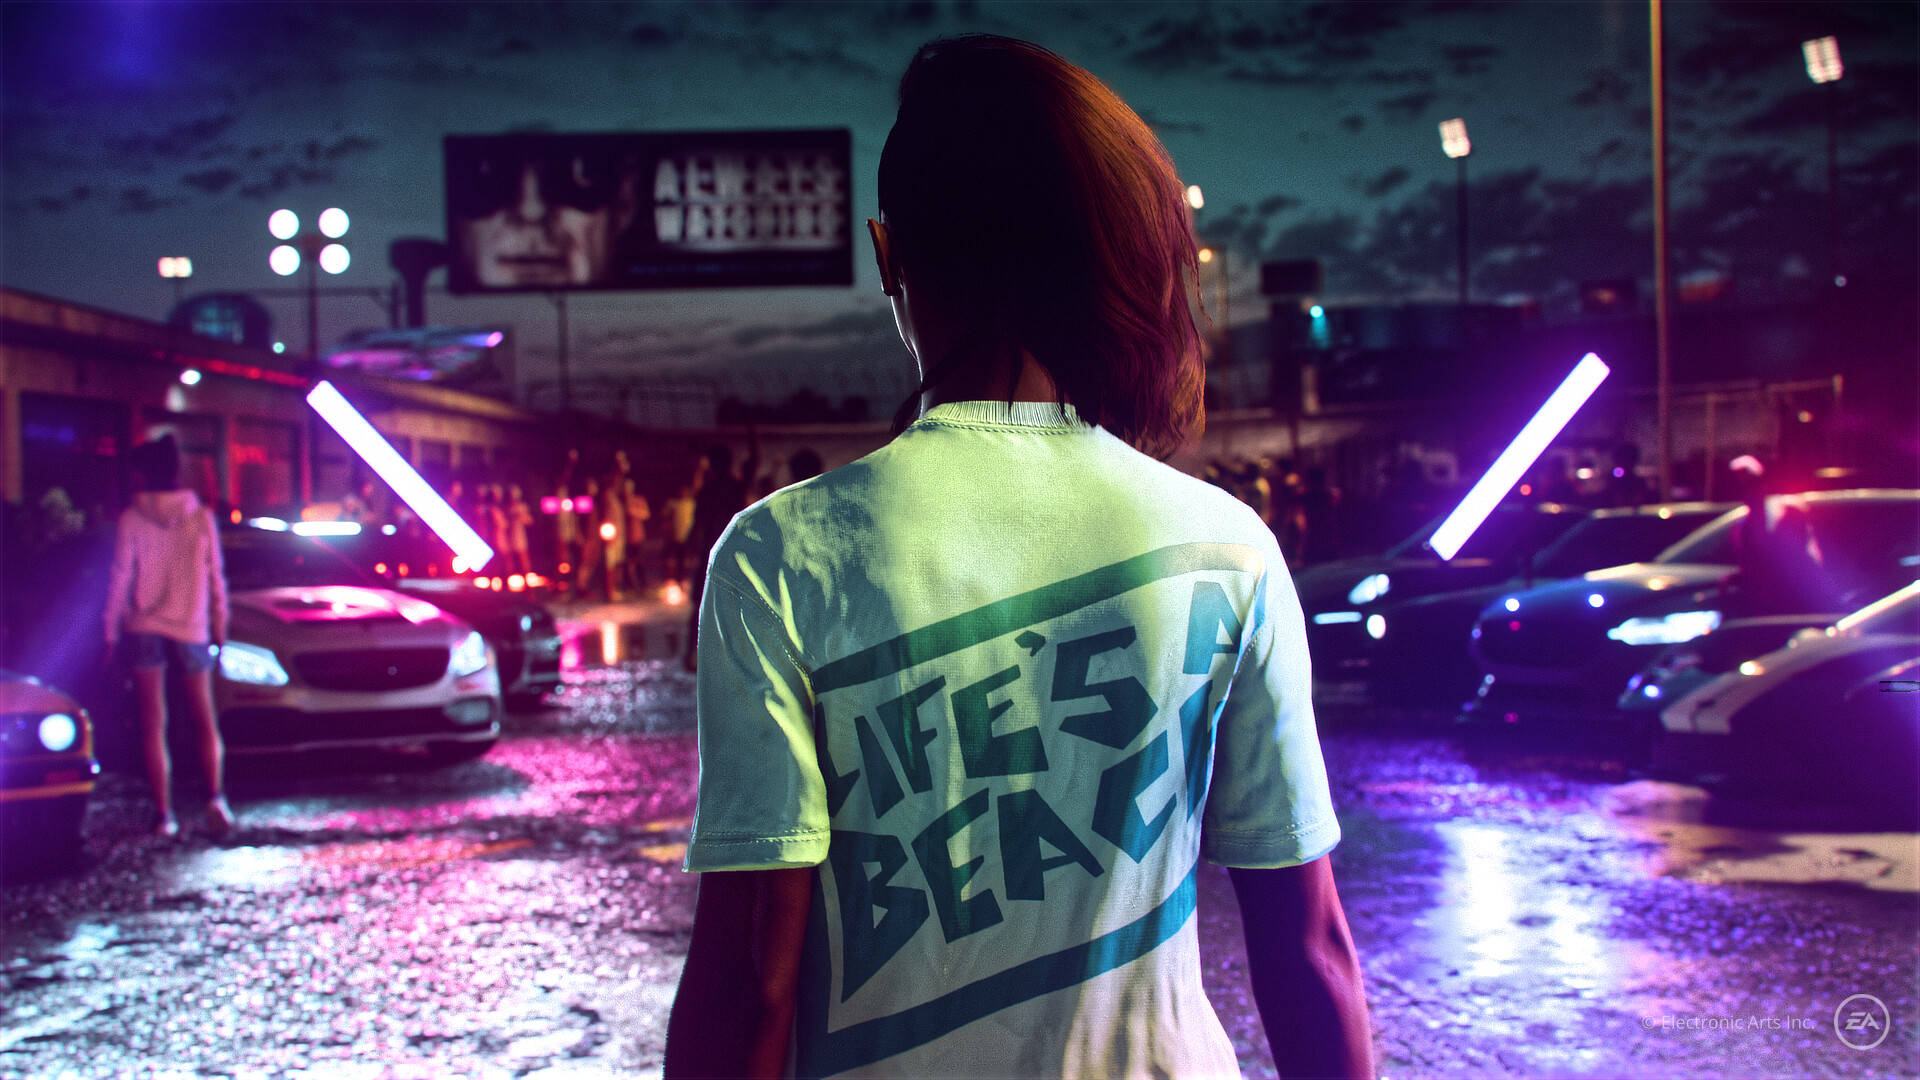 Need for Speed Trailer Introduces Icons and Main Cast